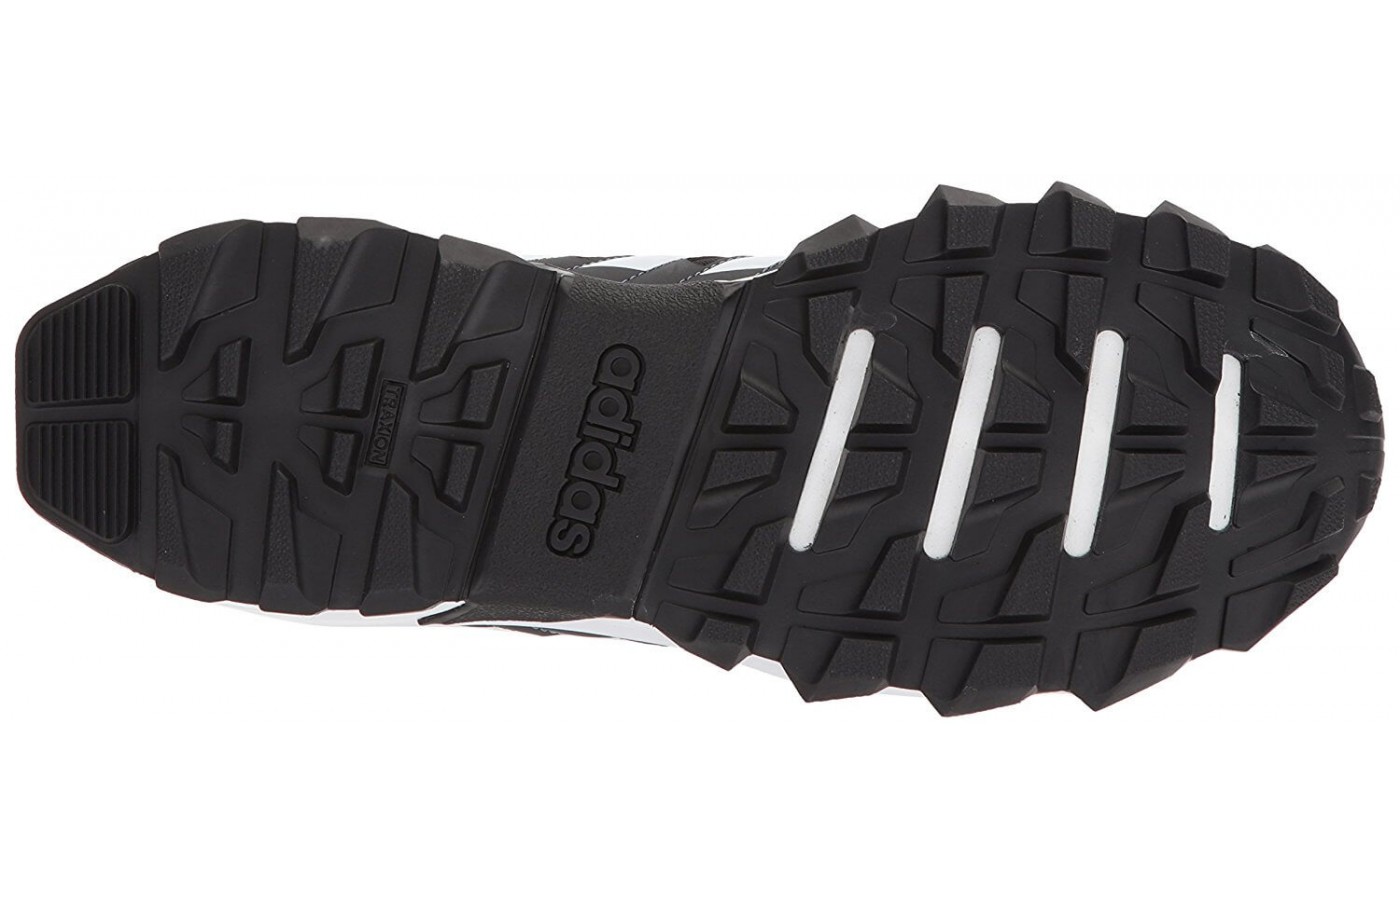 this shoe has deep tread grooves.